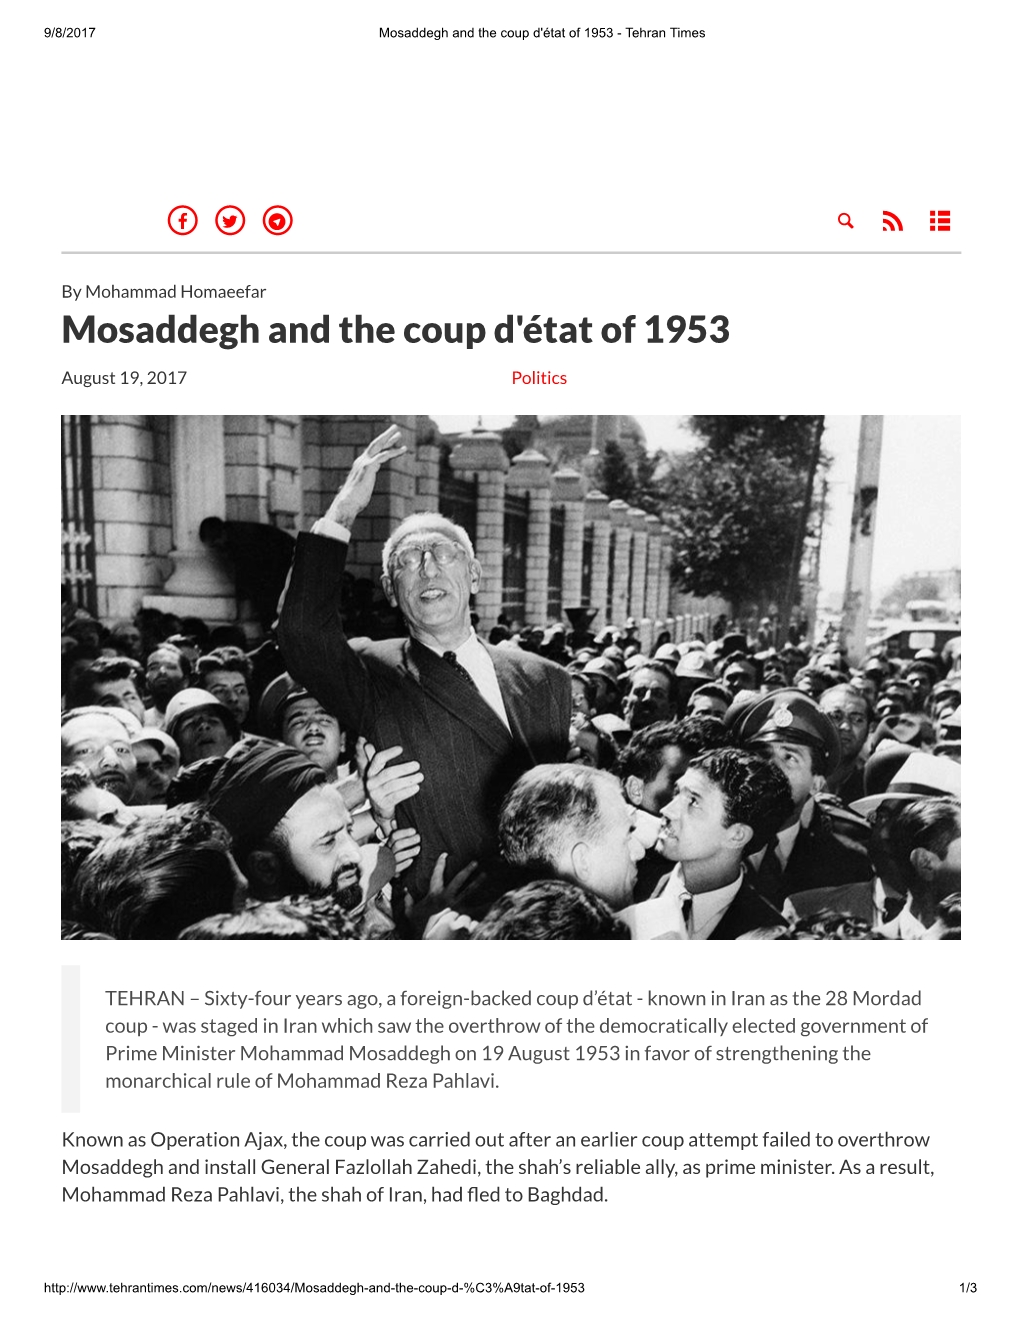 Mosaddegh and the Coup D'état of 1953 - Tehran Times